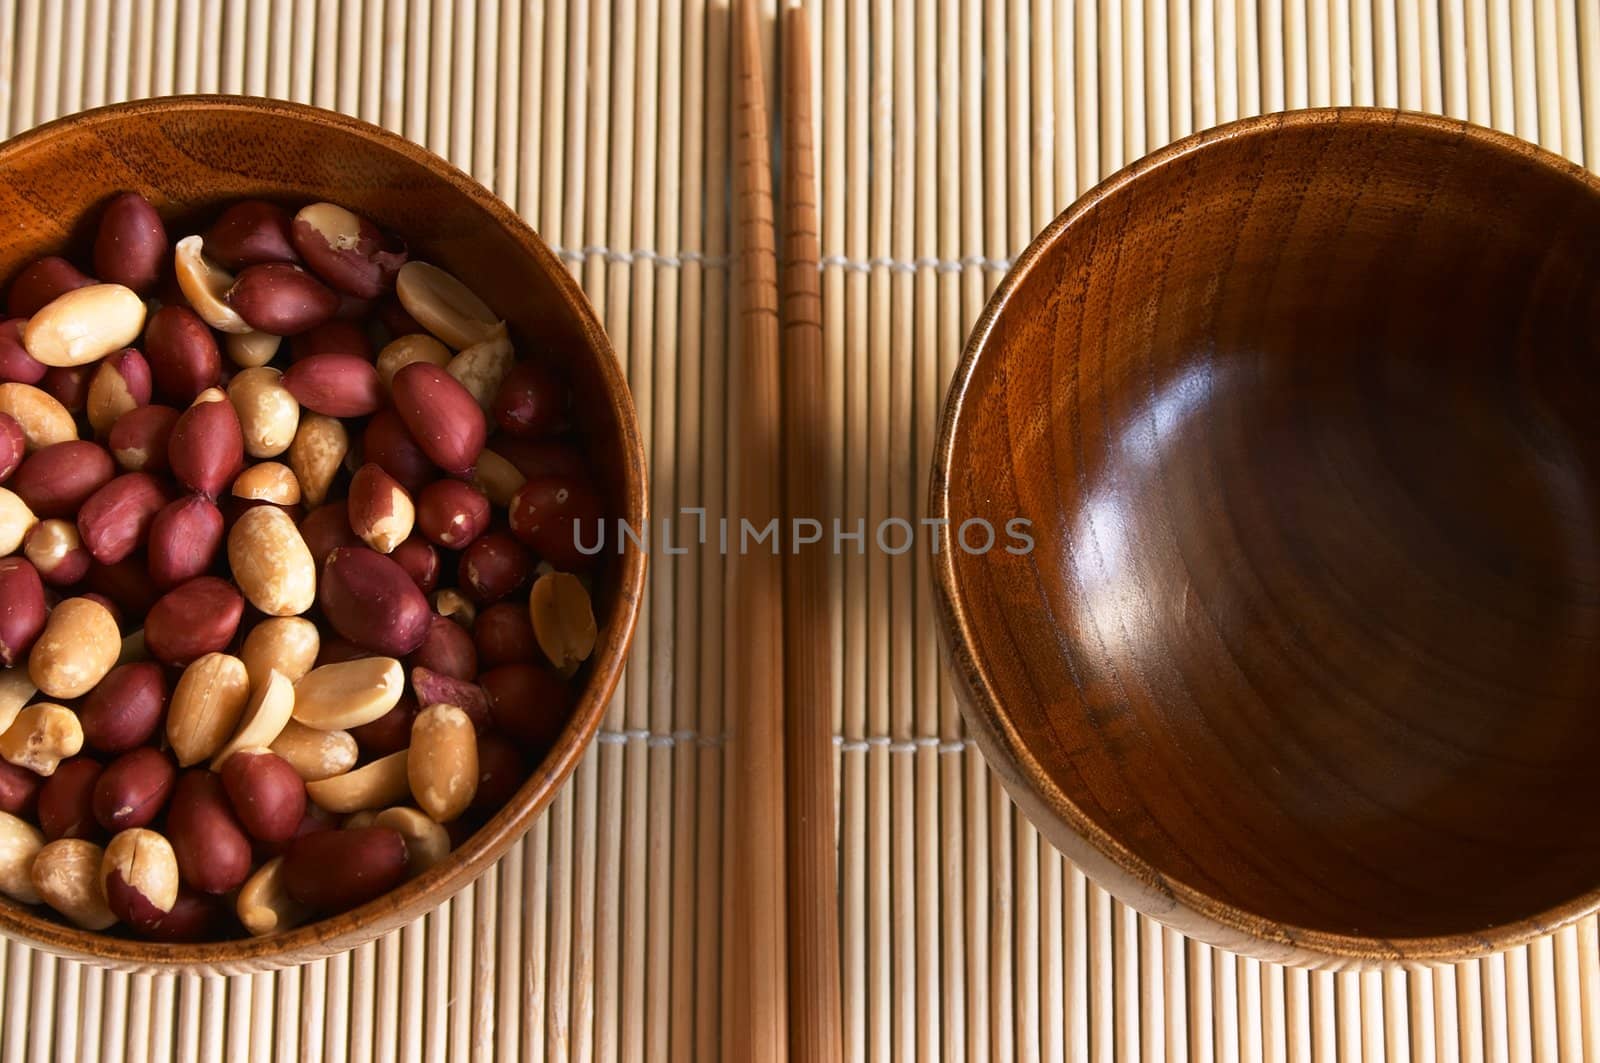 Wooden noggin with peanuts and empty one on the bamboo mat